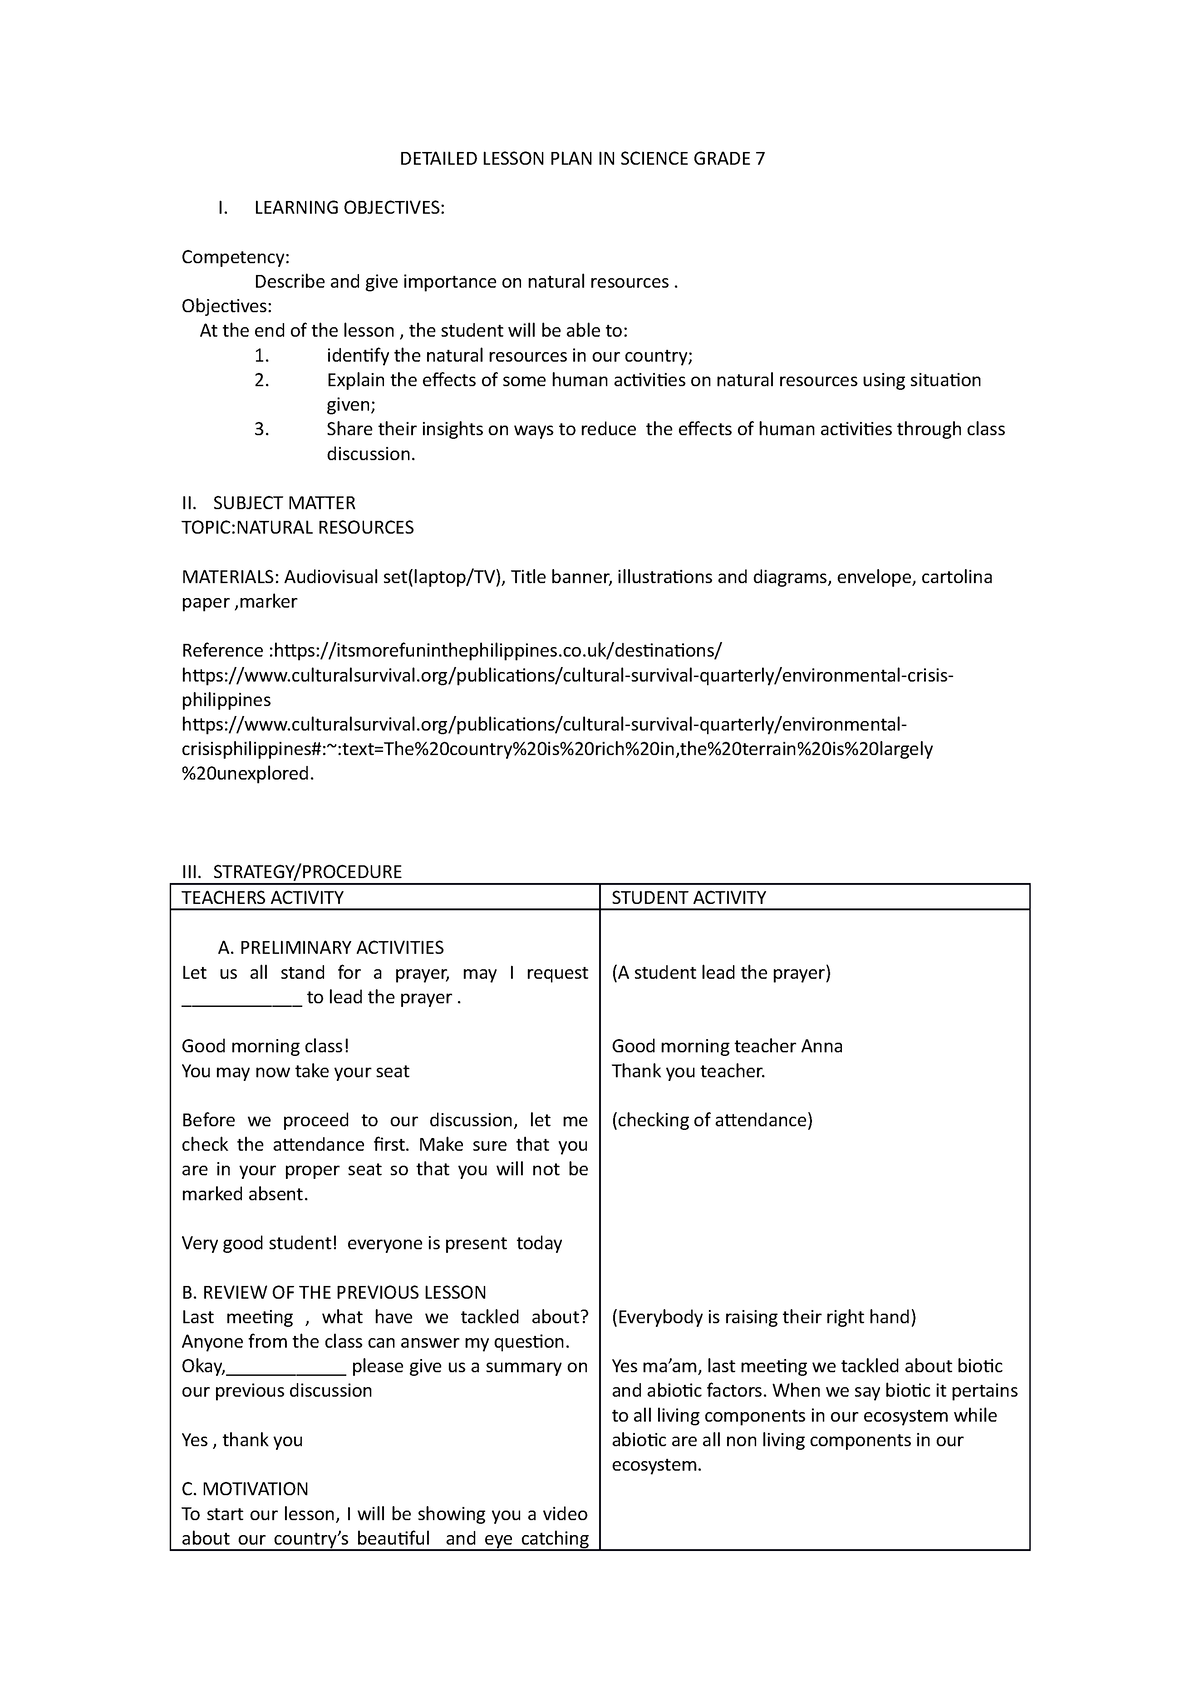 detailed-lesson-plan-in-science-grade-7-detailed-lesson-plan-in